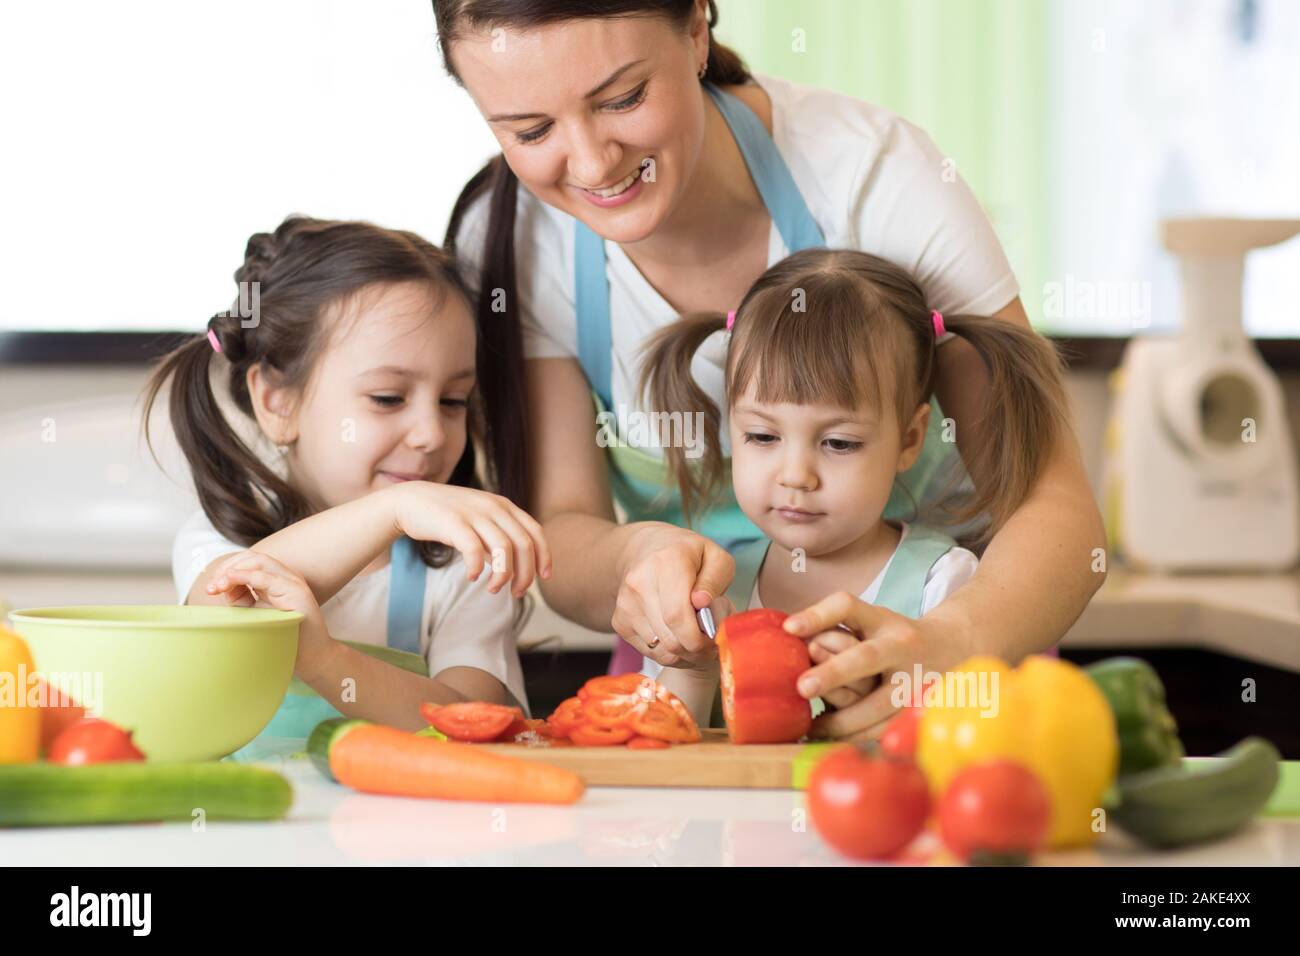 family mum with kids daughters chopping vegetables in home kitchen Stock Photo